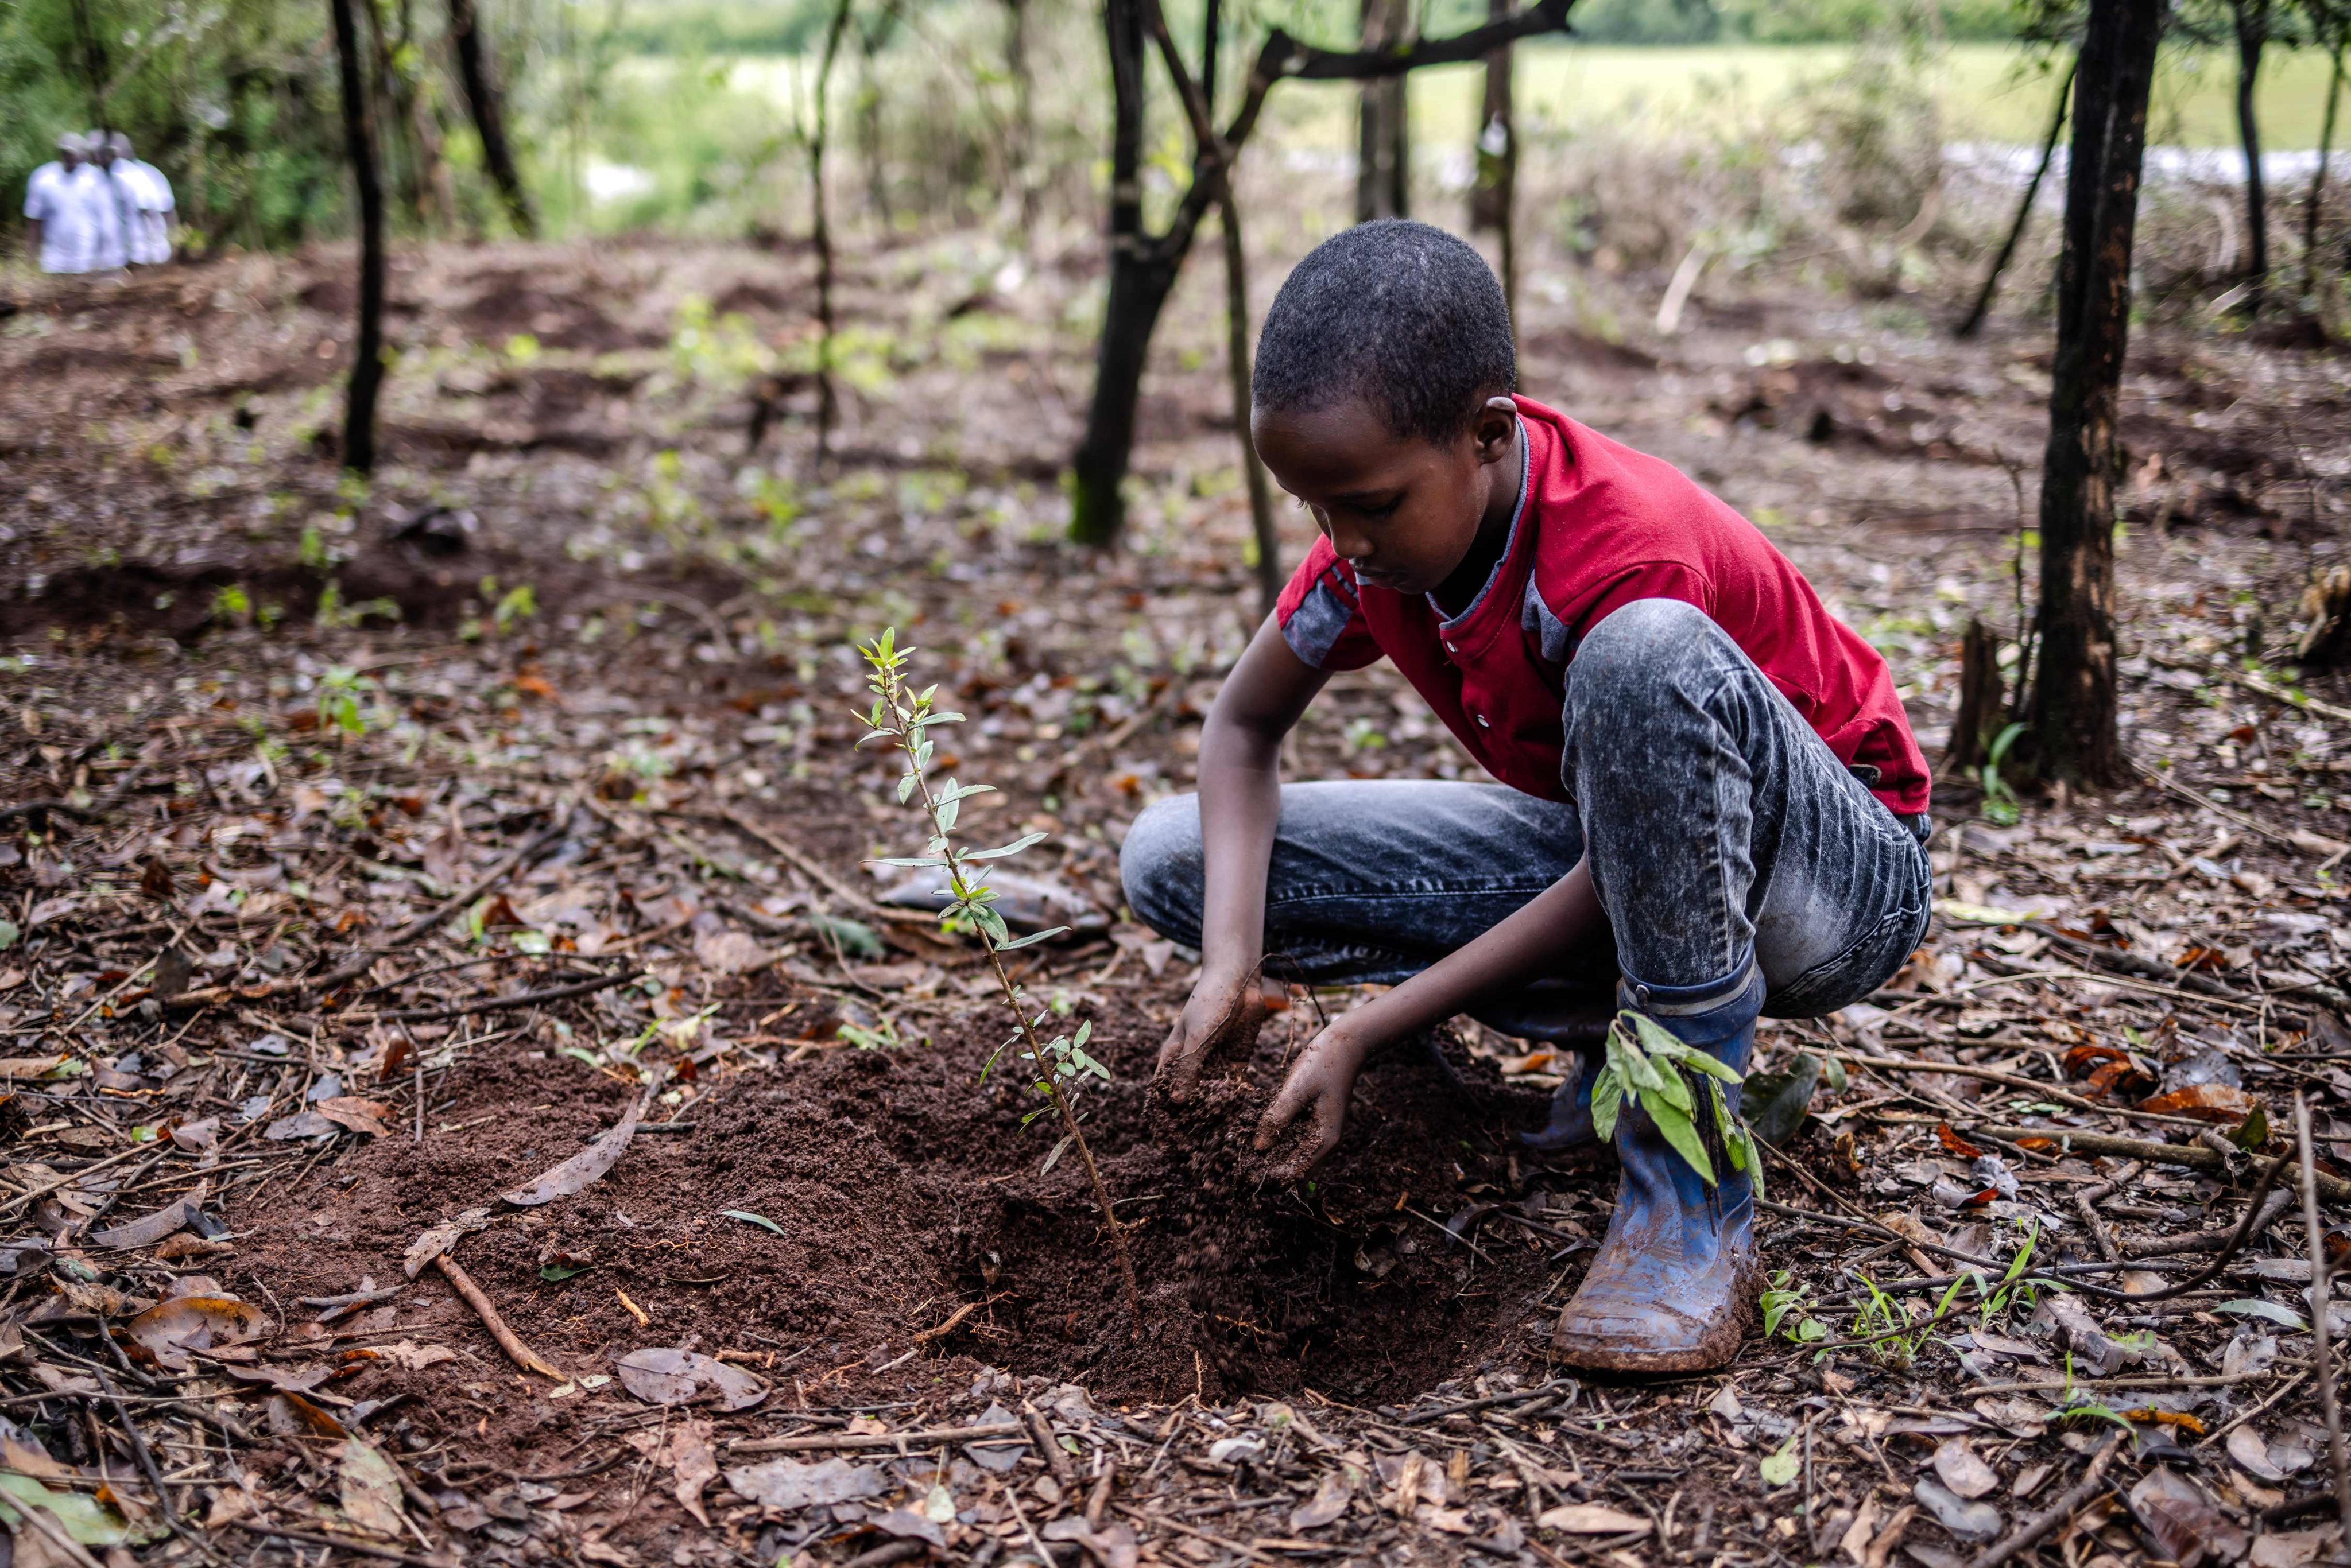 Isaac Molu, 11, plants a tree seedling on Monday in Kenya, part of a government campaign. Photo: AFP